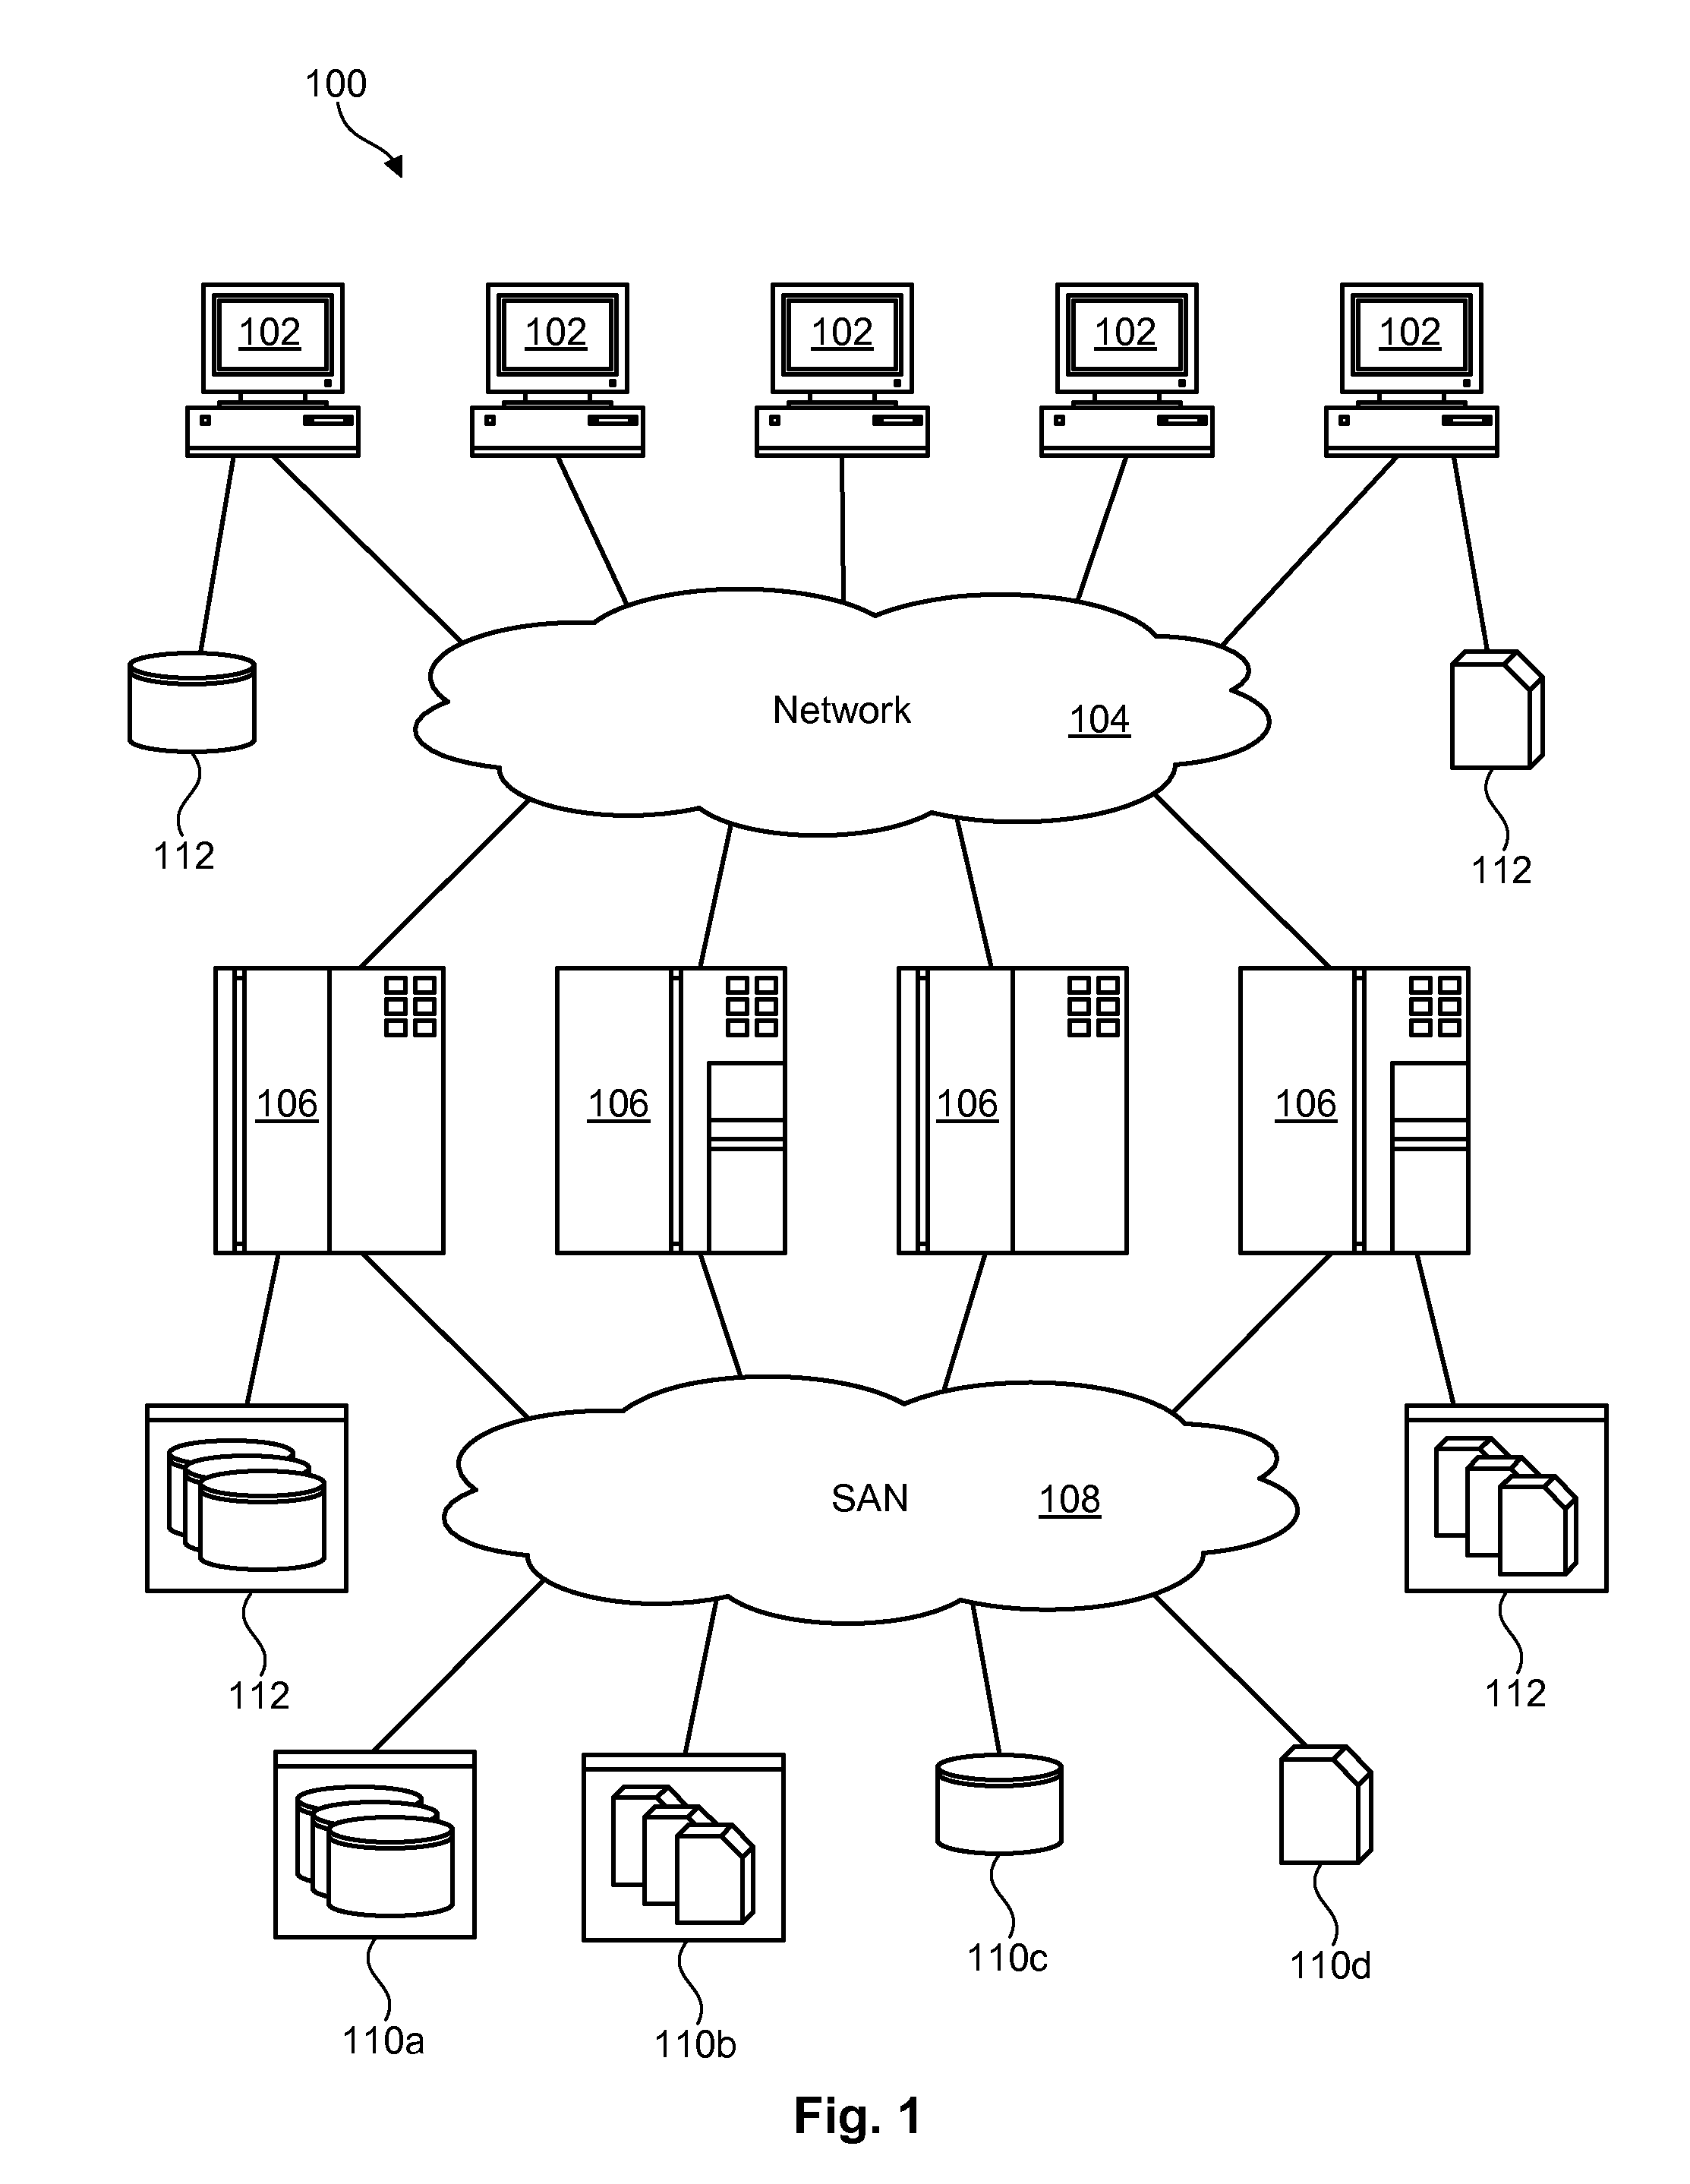 Volume coherency verification for sequential-access storage media